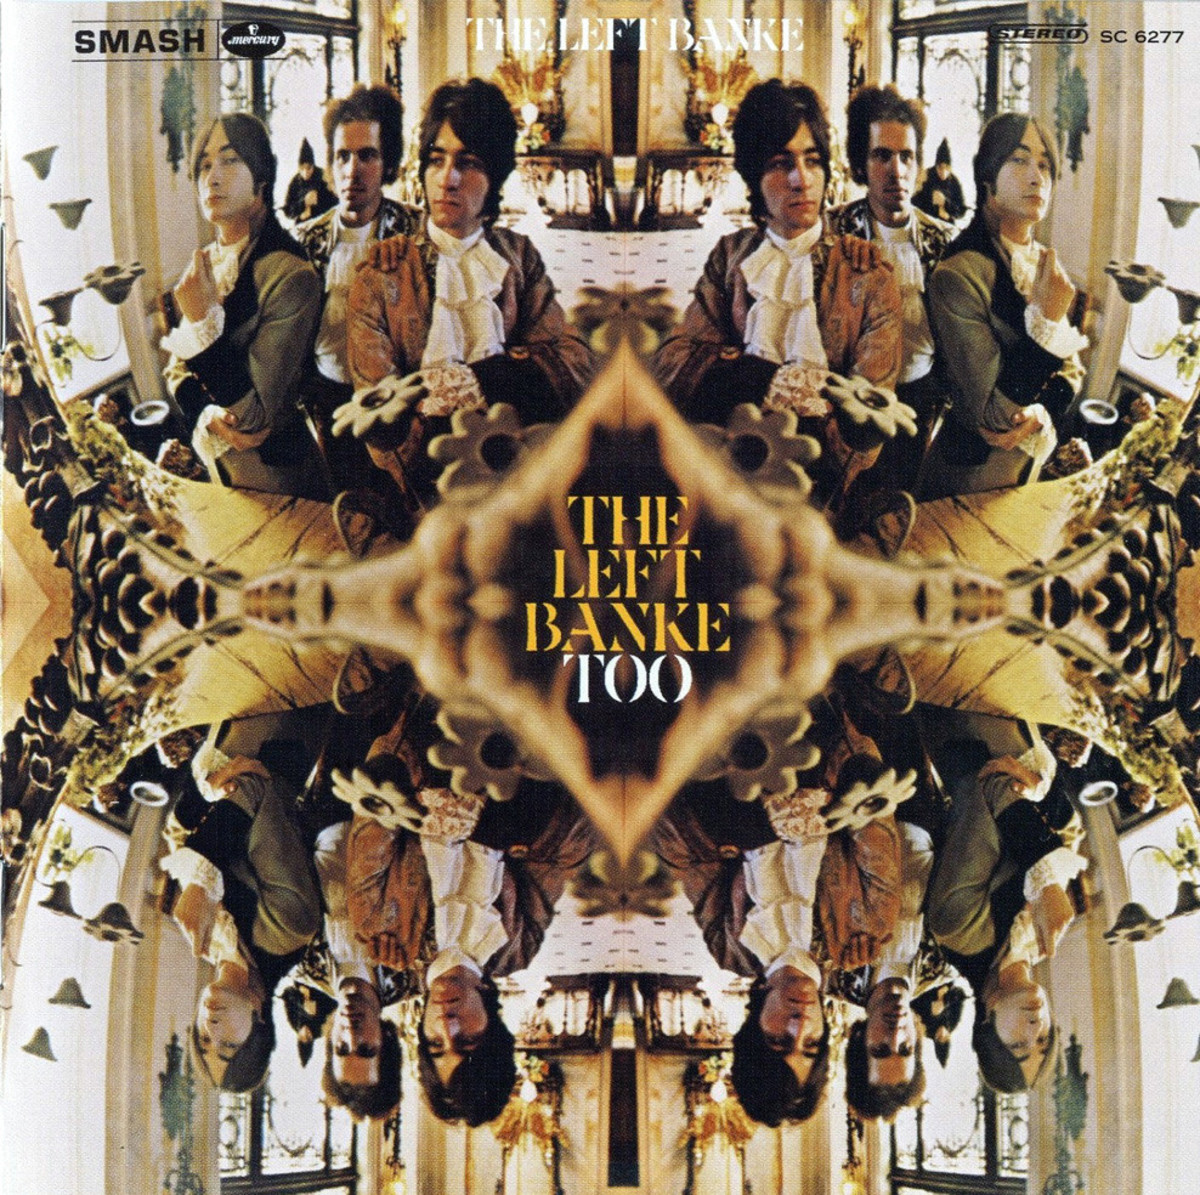 The band's second album The Left Banke Too is in the Goldmine store!